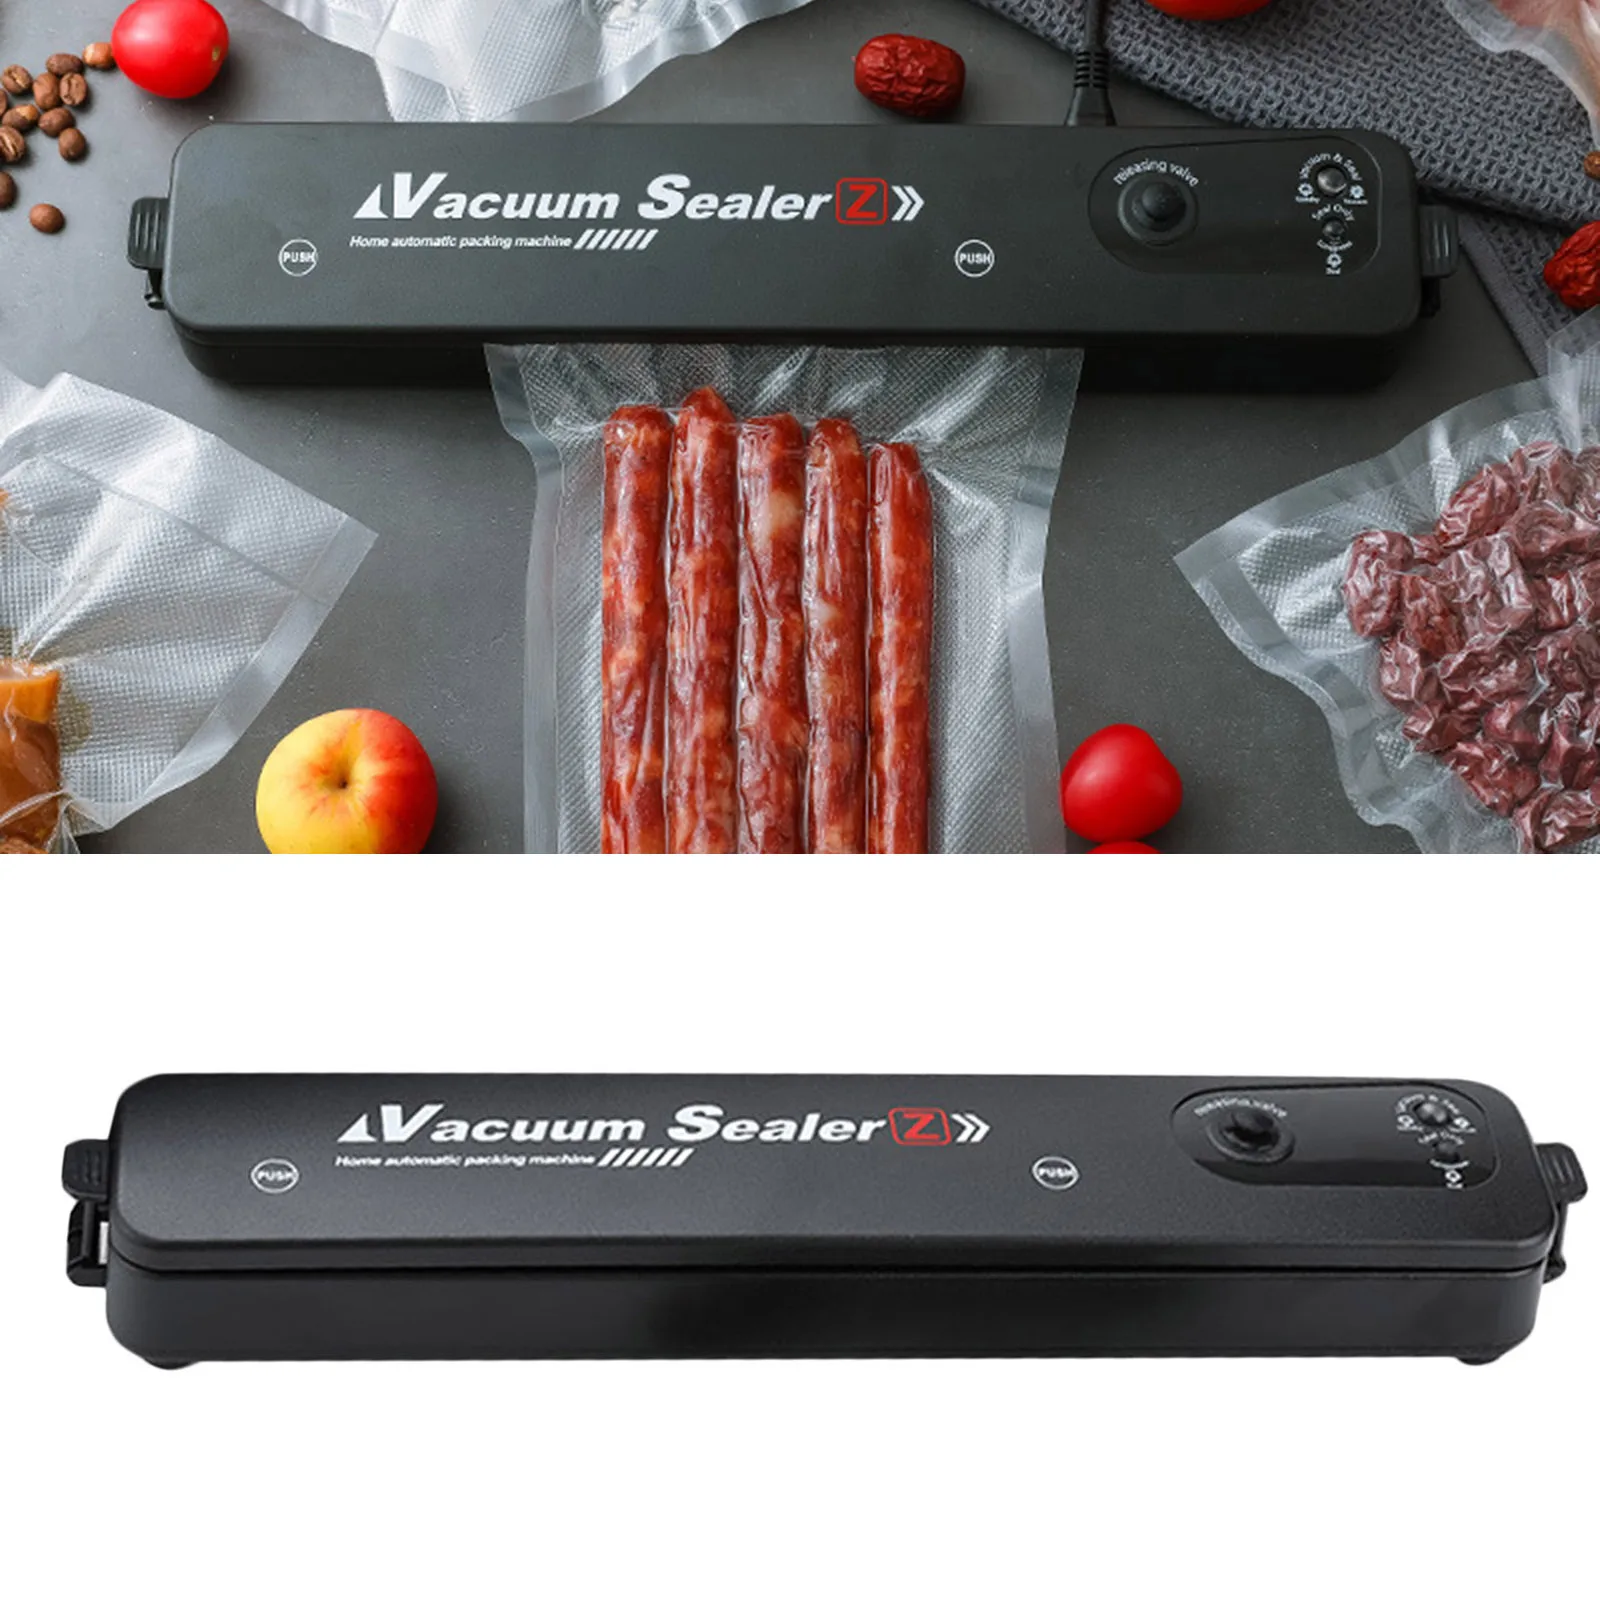 Food Vacuum Sealer Packaging Machine including 10Pcs bag Vaccum Packer can be use for A Meal Food Saver, Fresh-Keeping